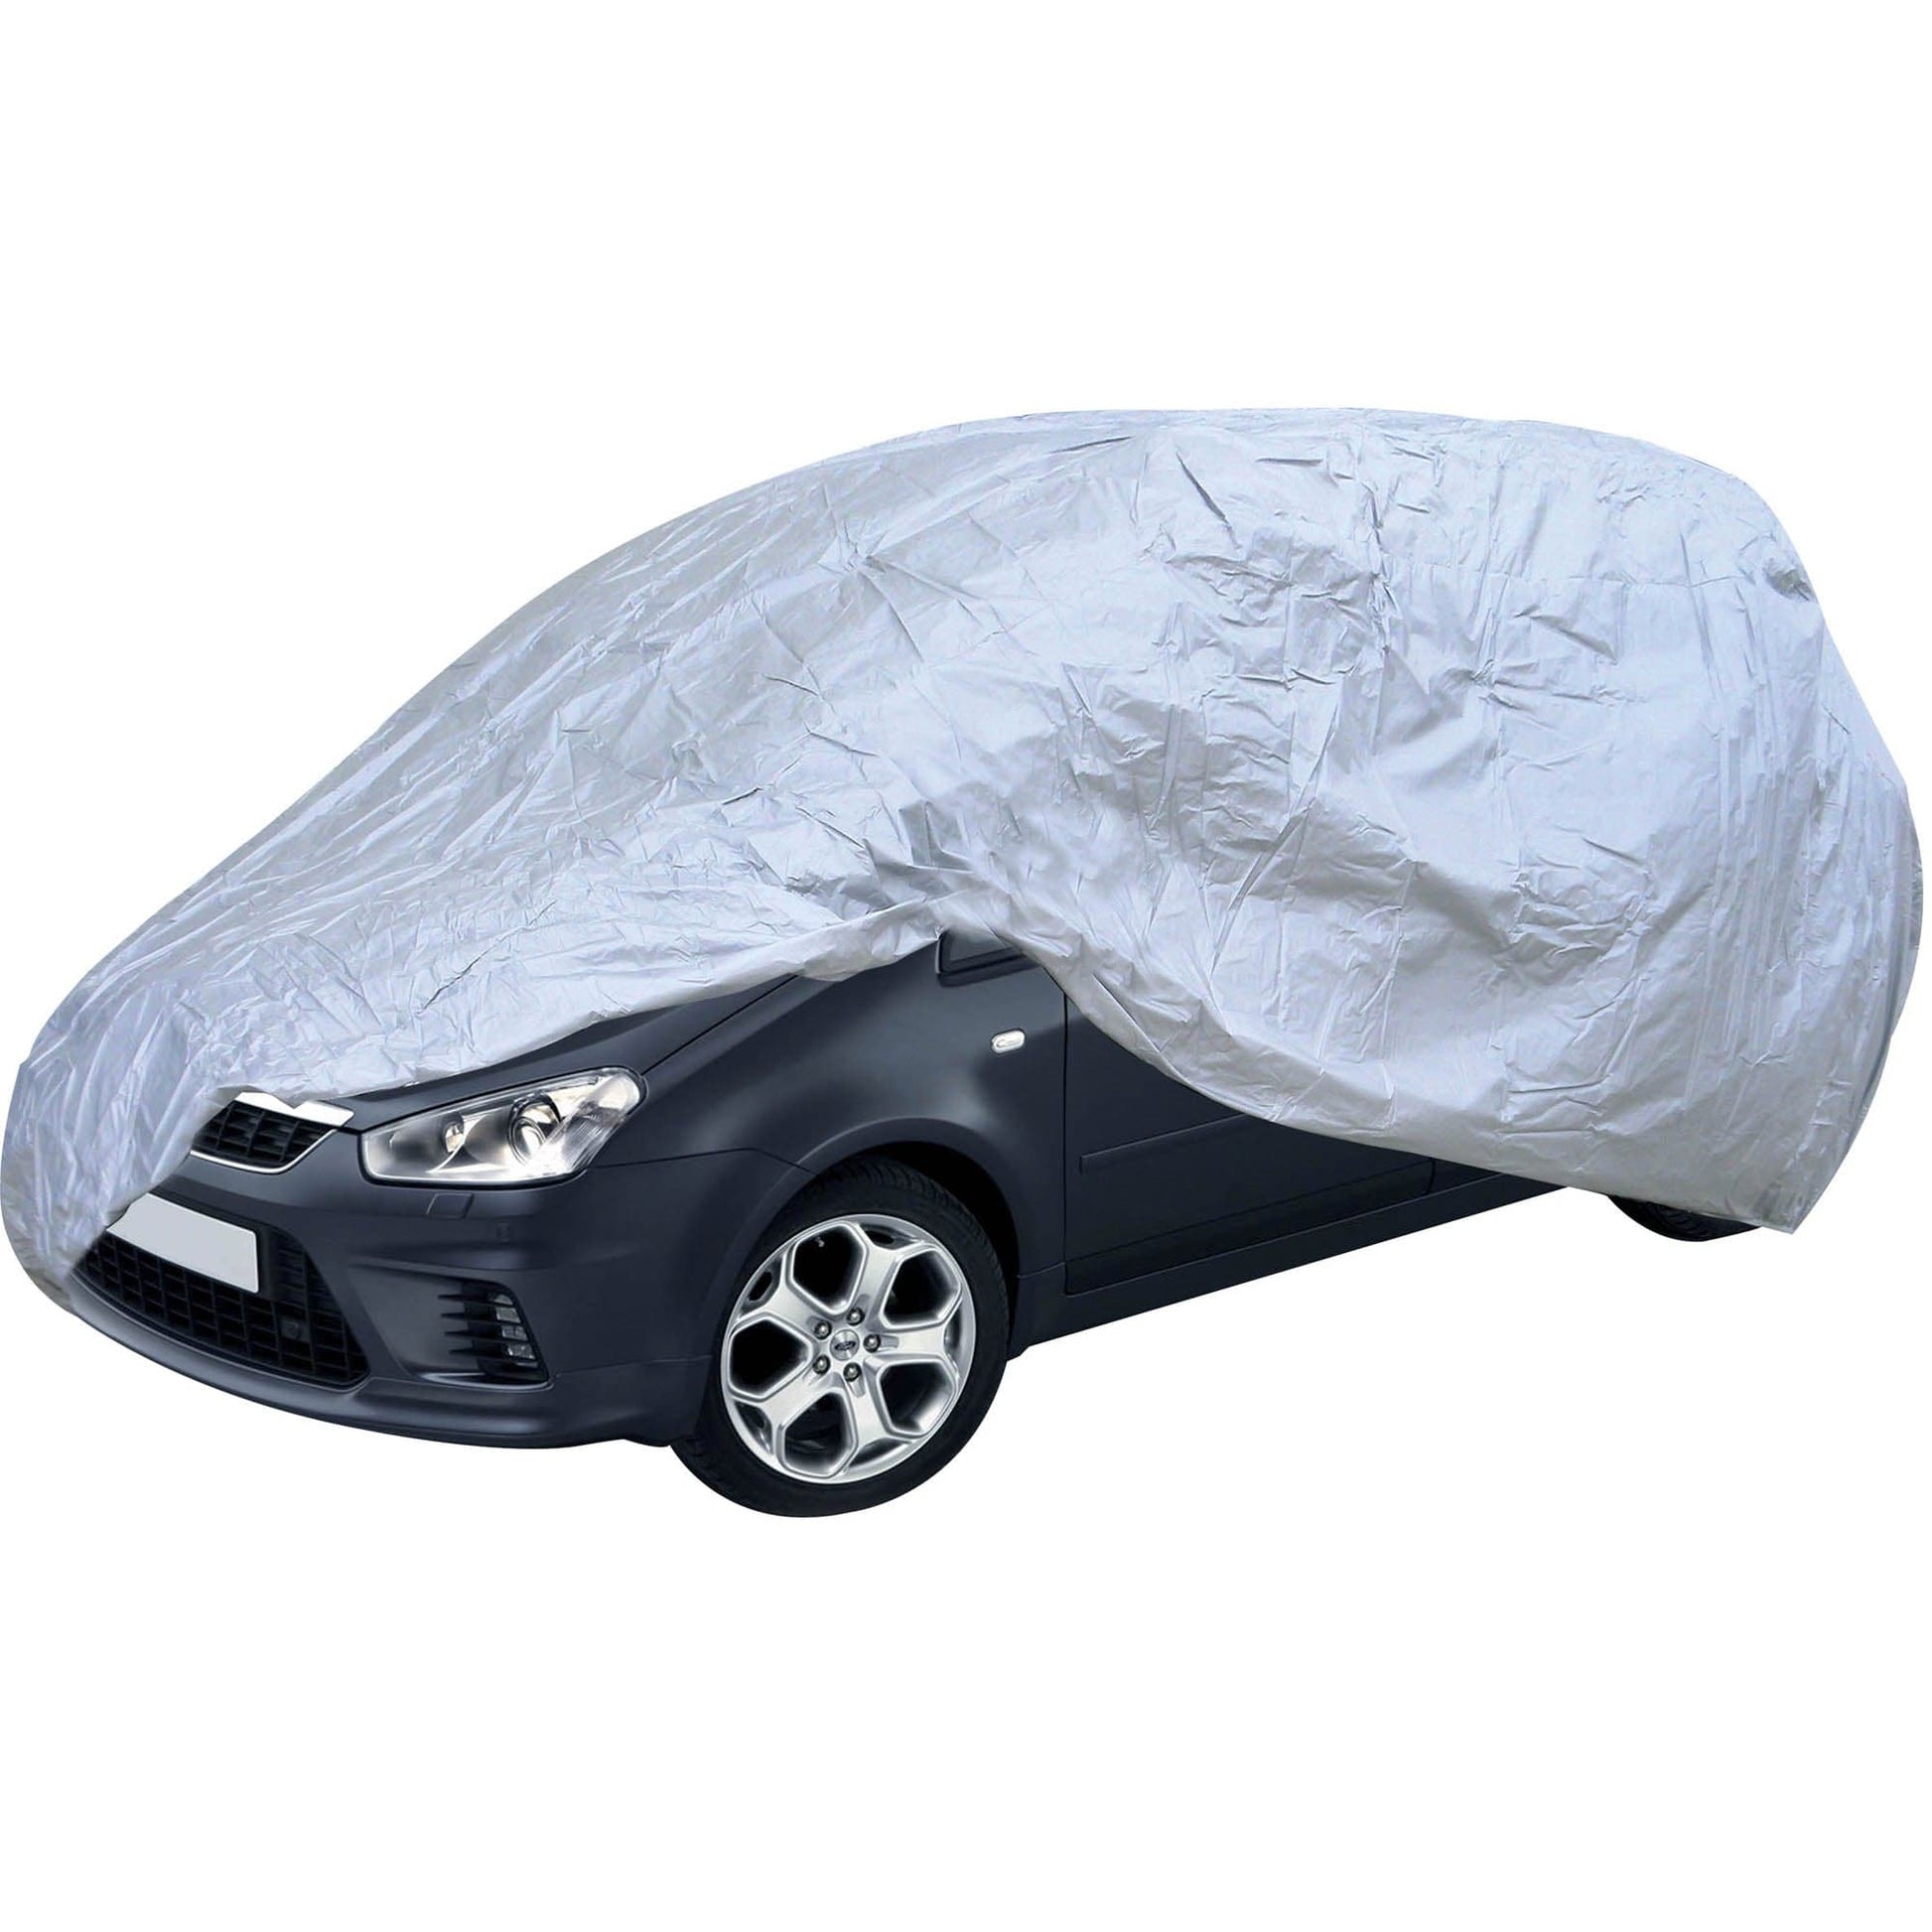 WATERPROOF CAR COVER SIZE XL - best price from Maltashopper.com BR490000820